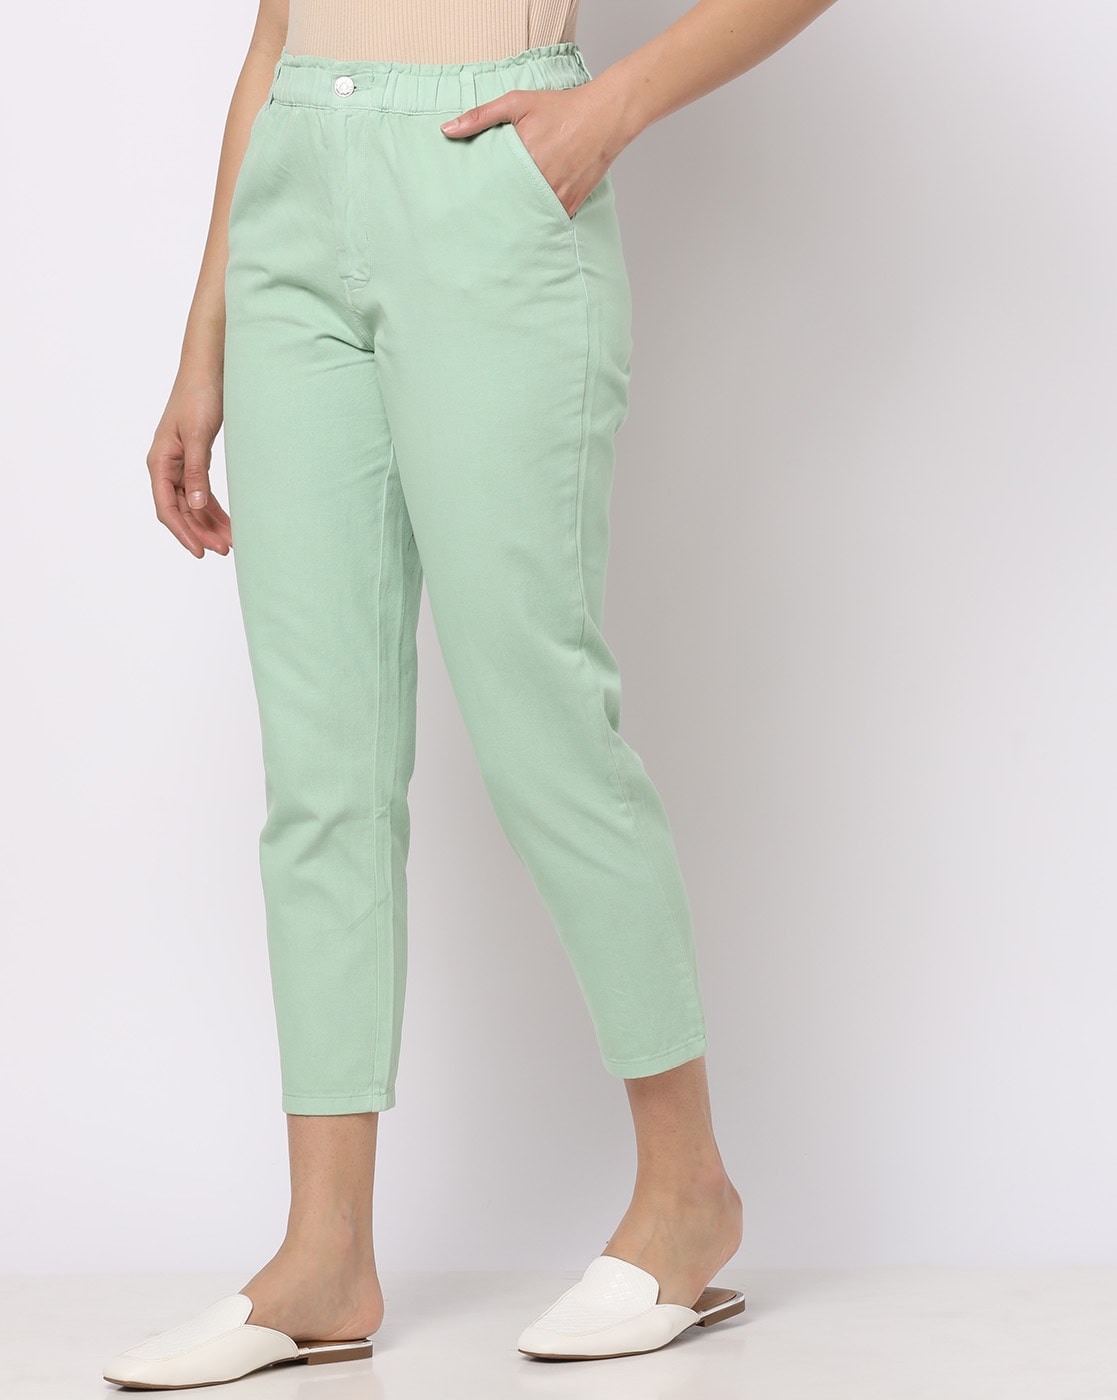 Buy Online Mint Green Cotton Flax Pants for Women  Girls at Best Prices in  Biba IndiaSHEESHM15983